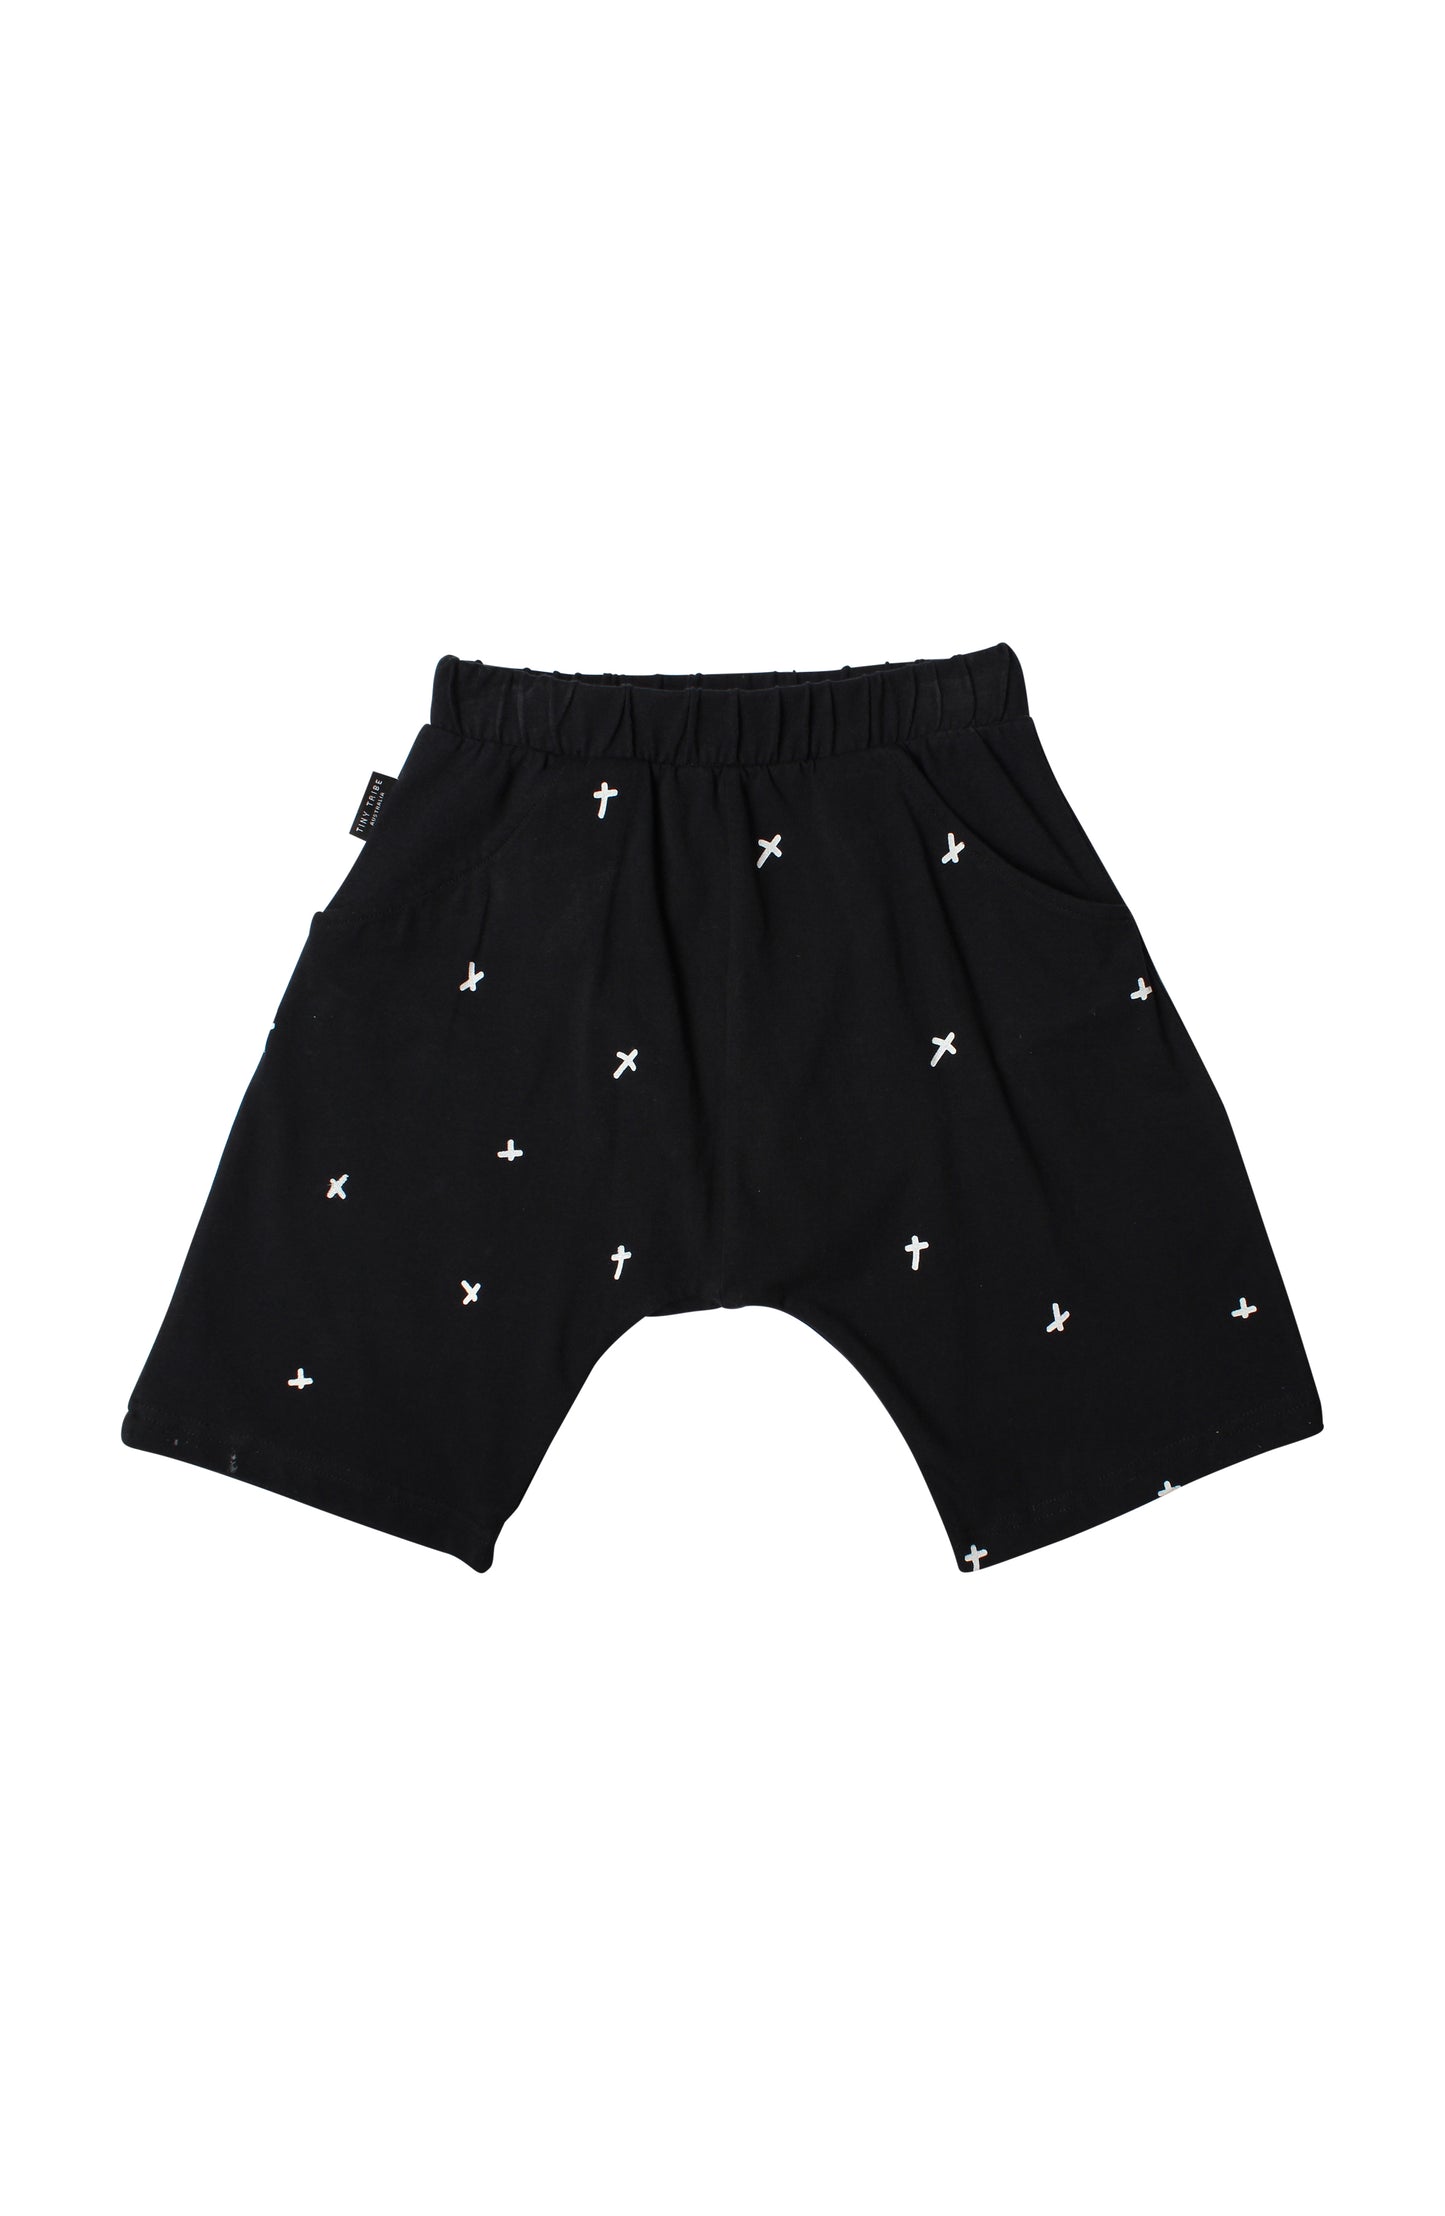 *Last One* Tiny Tribe X Relaxed Short - Size 0